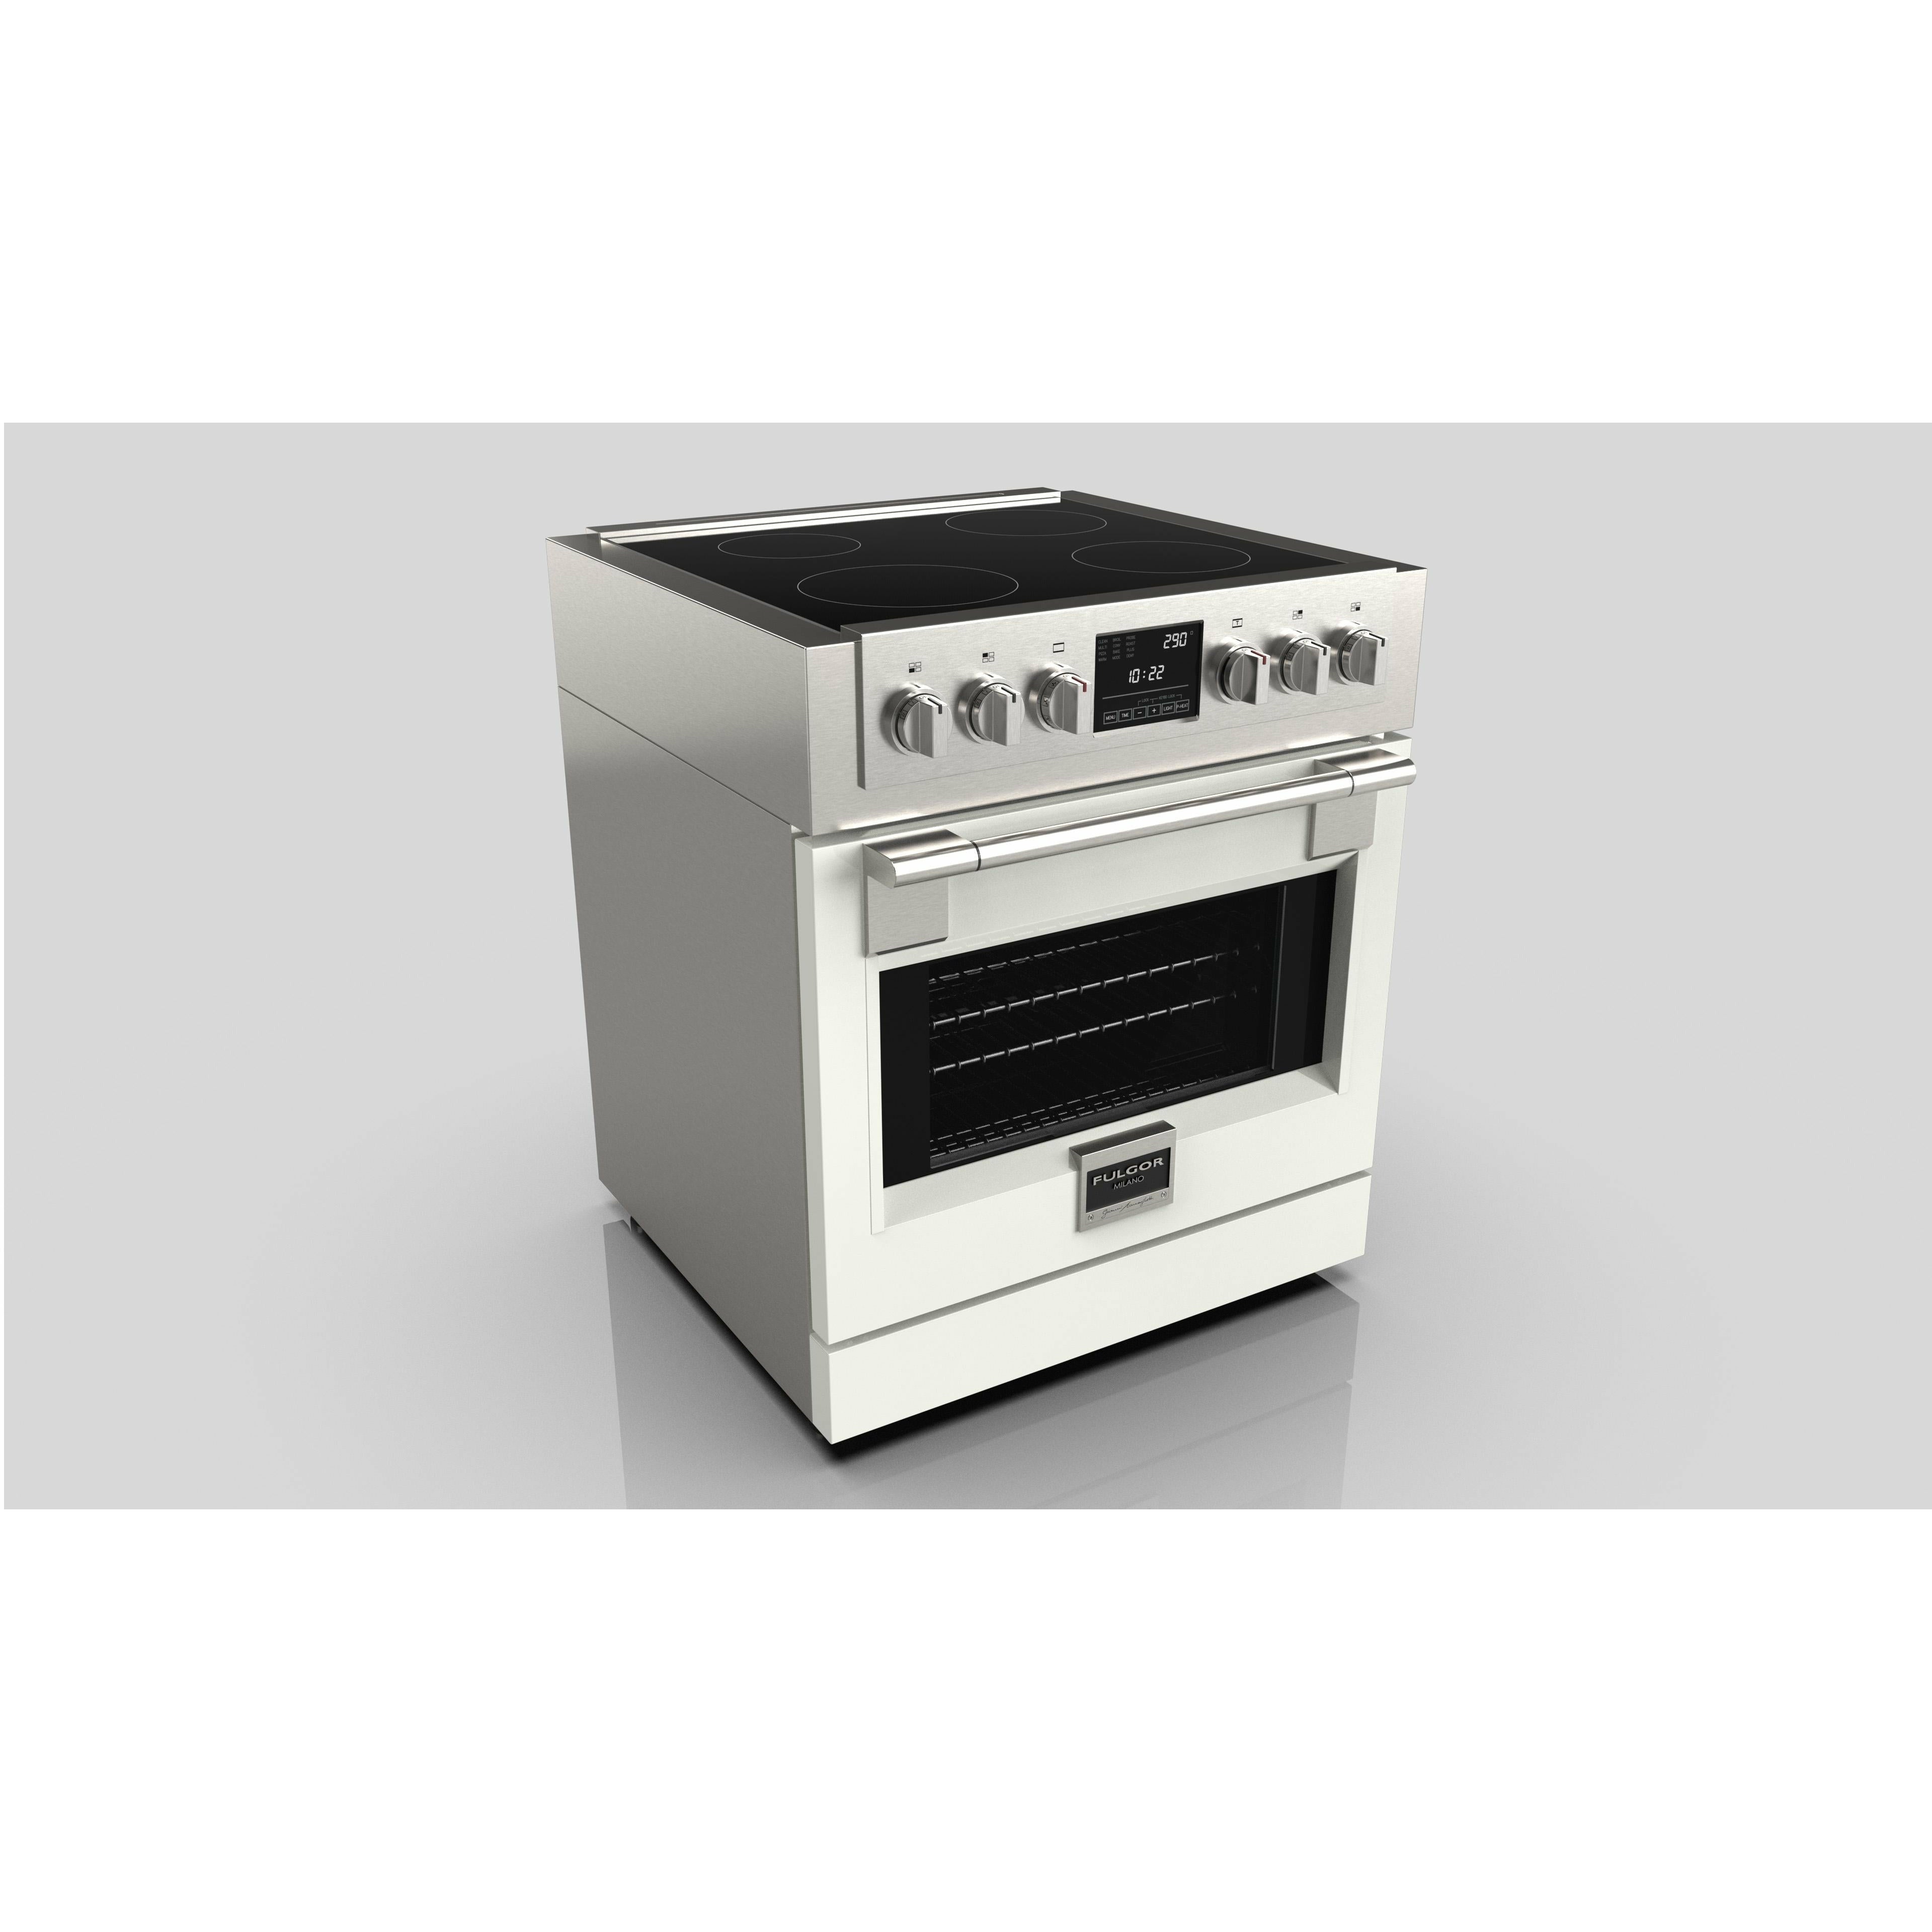 Fulgor Milano 30" Freestanding Induction Range with 4 Cooking Zones, Stainless Steel - F6PIR304S1